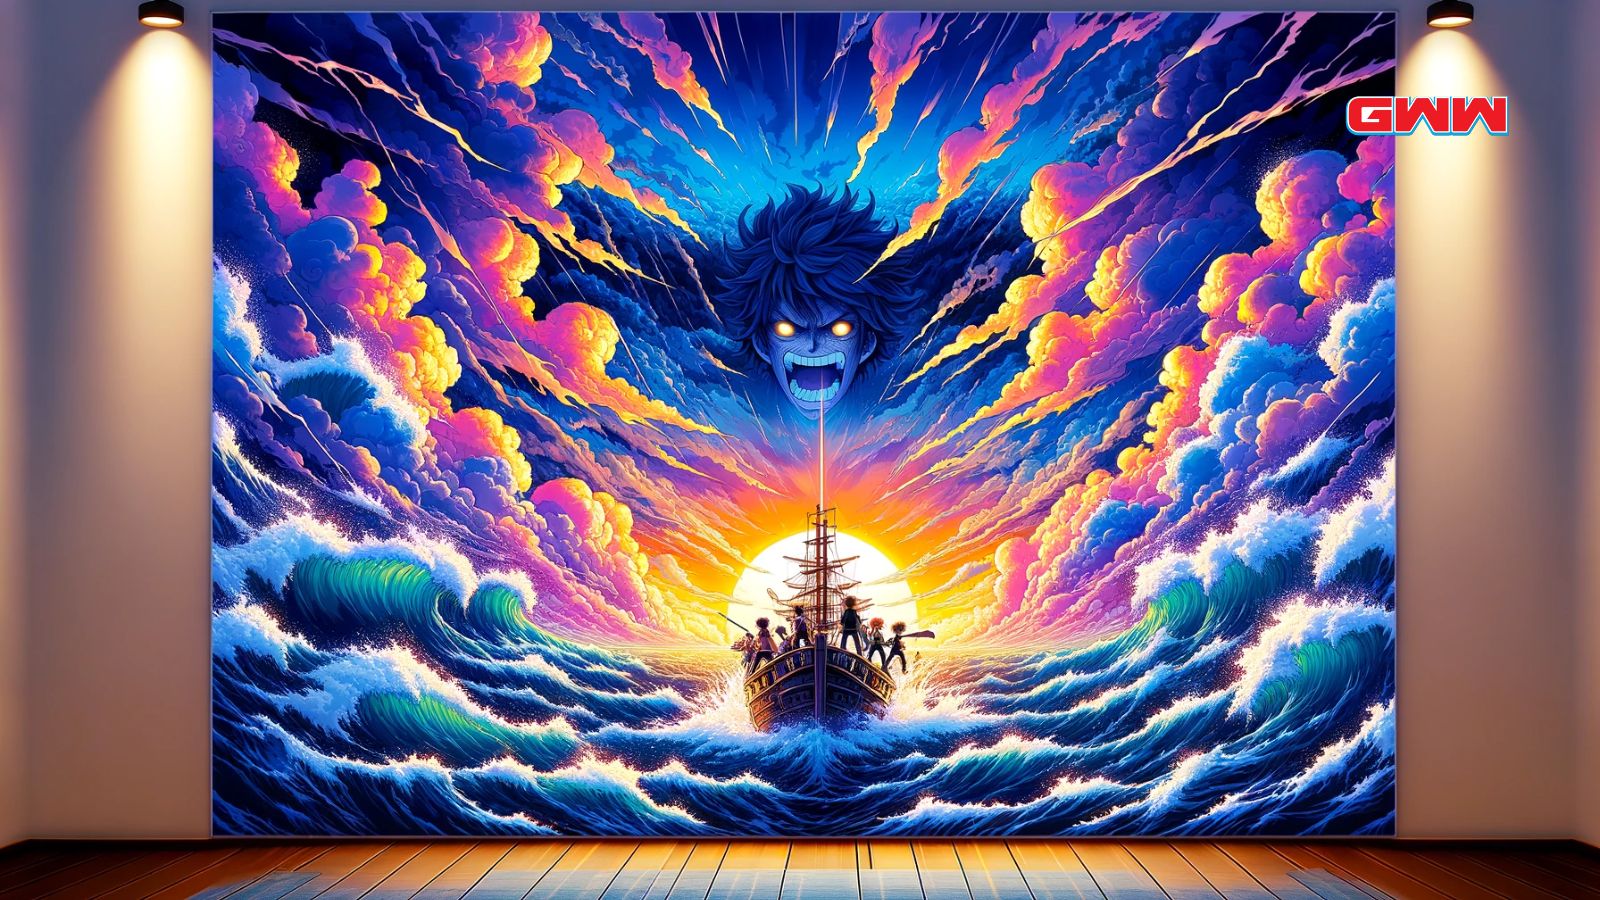 A vibrant and colorful anime-style depiction of a climactic scene featuring a group of anime characters on a ship